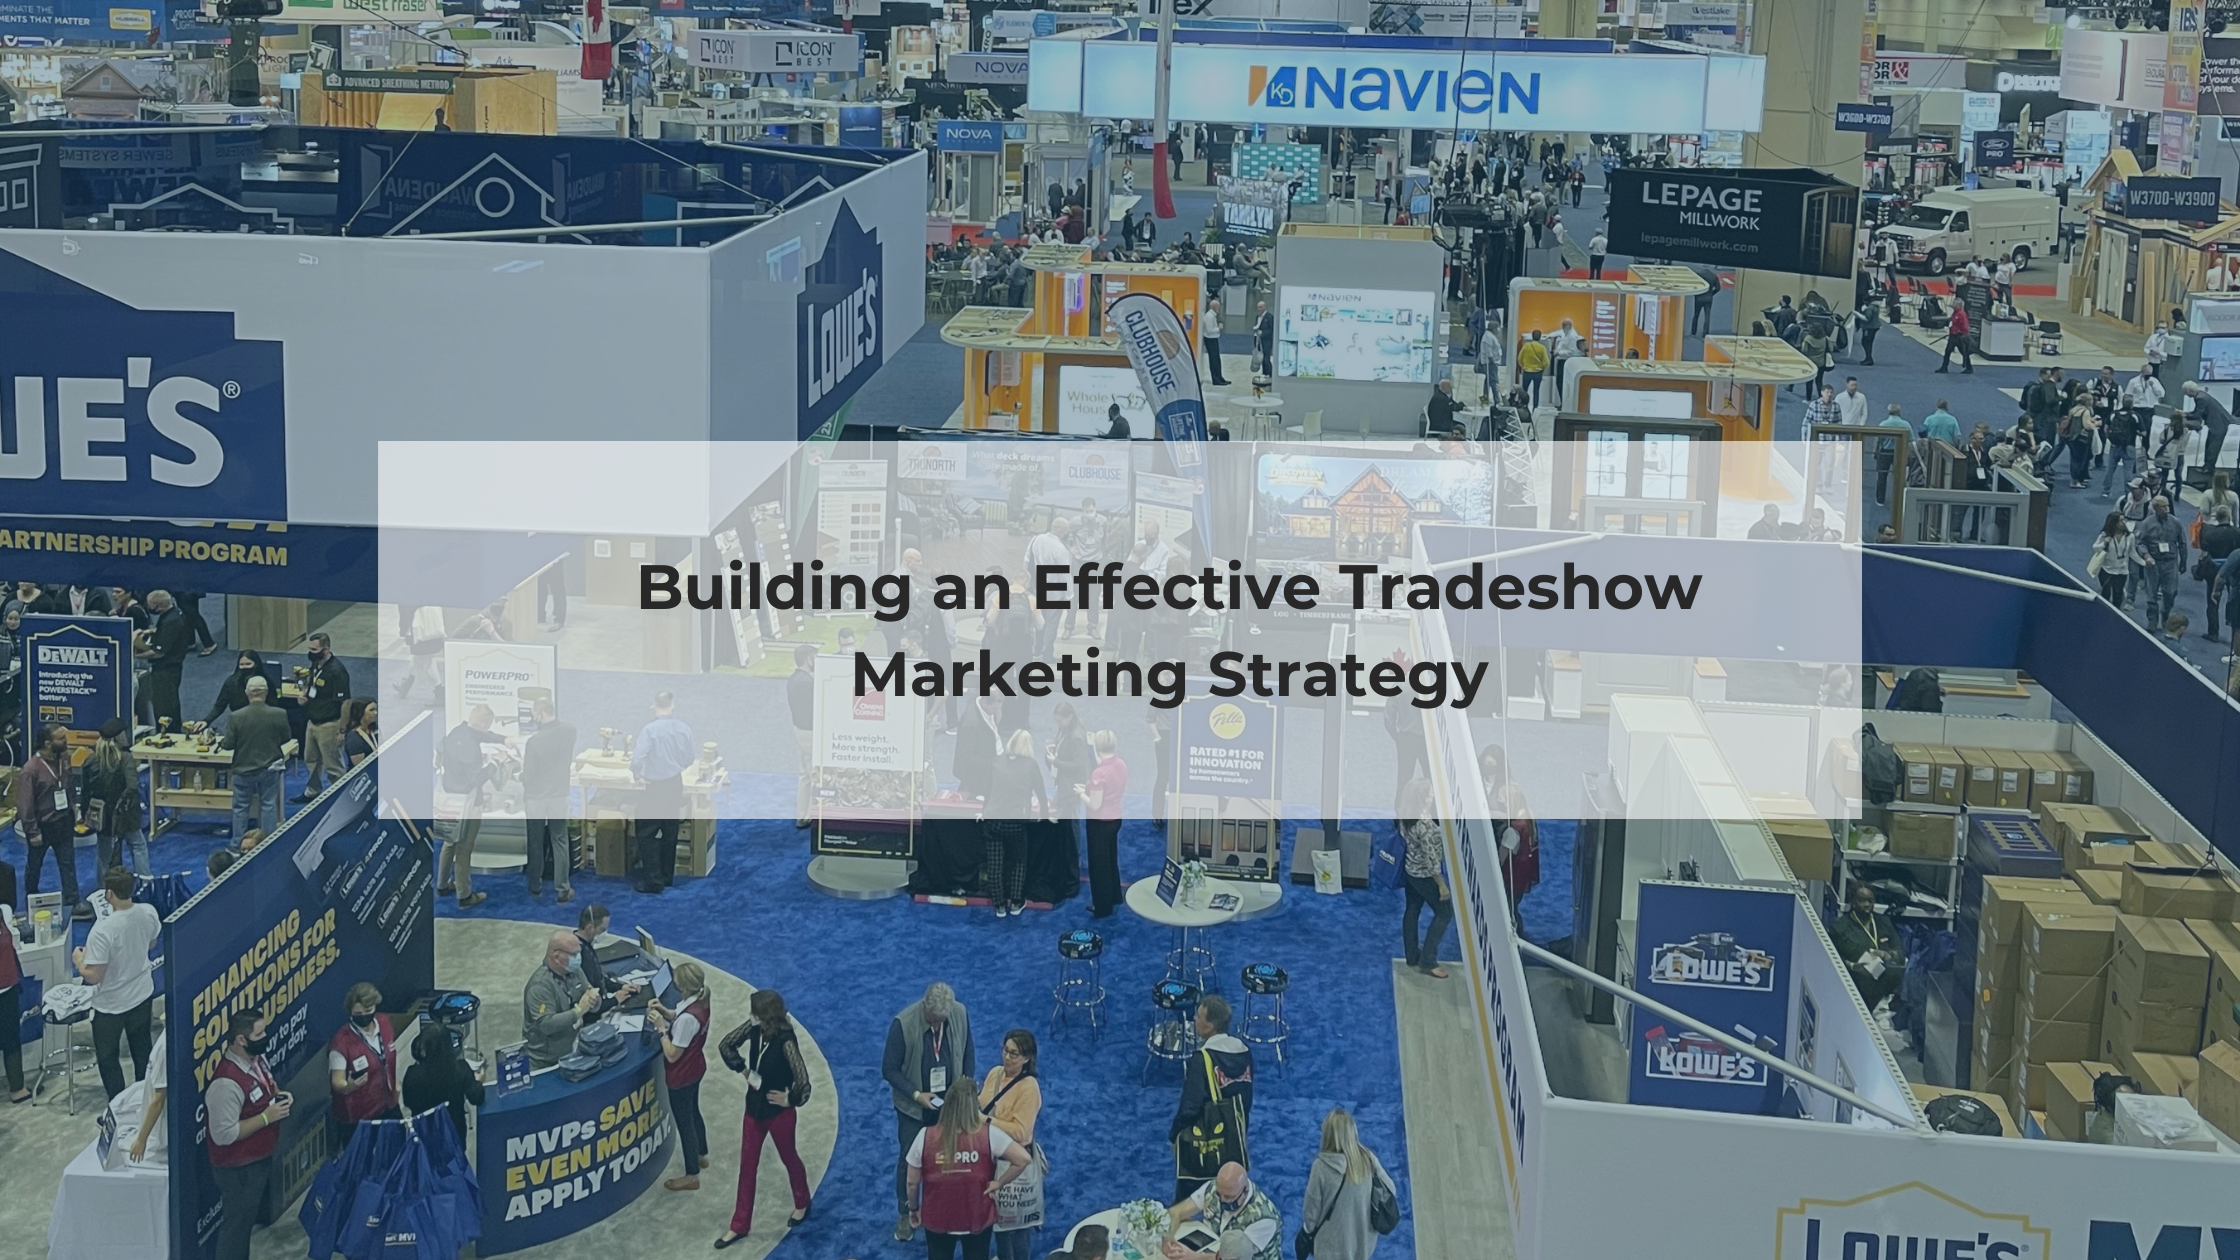 Building an Effective Tradeshow Marketing Strategy